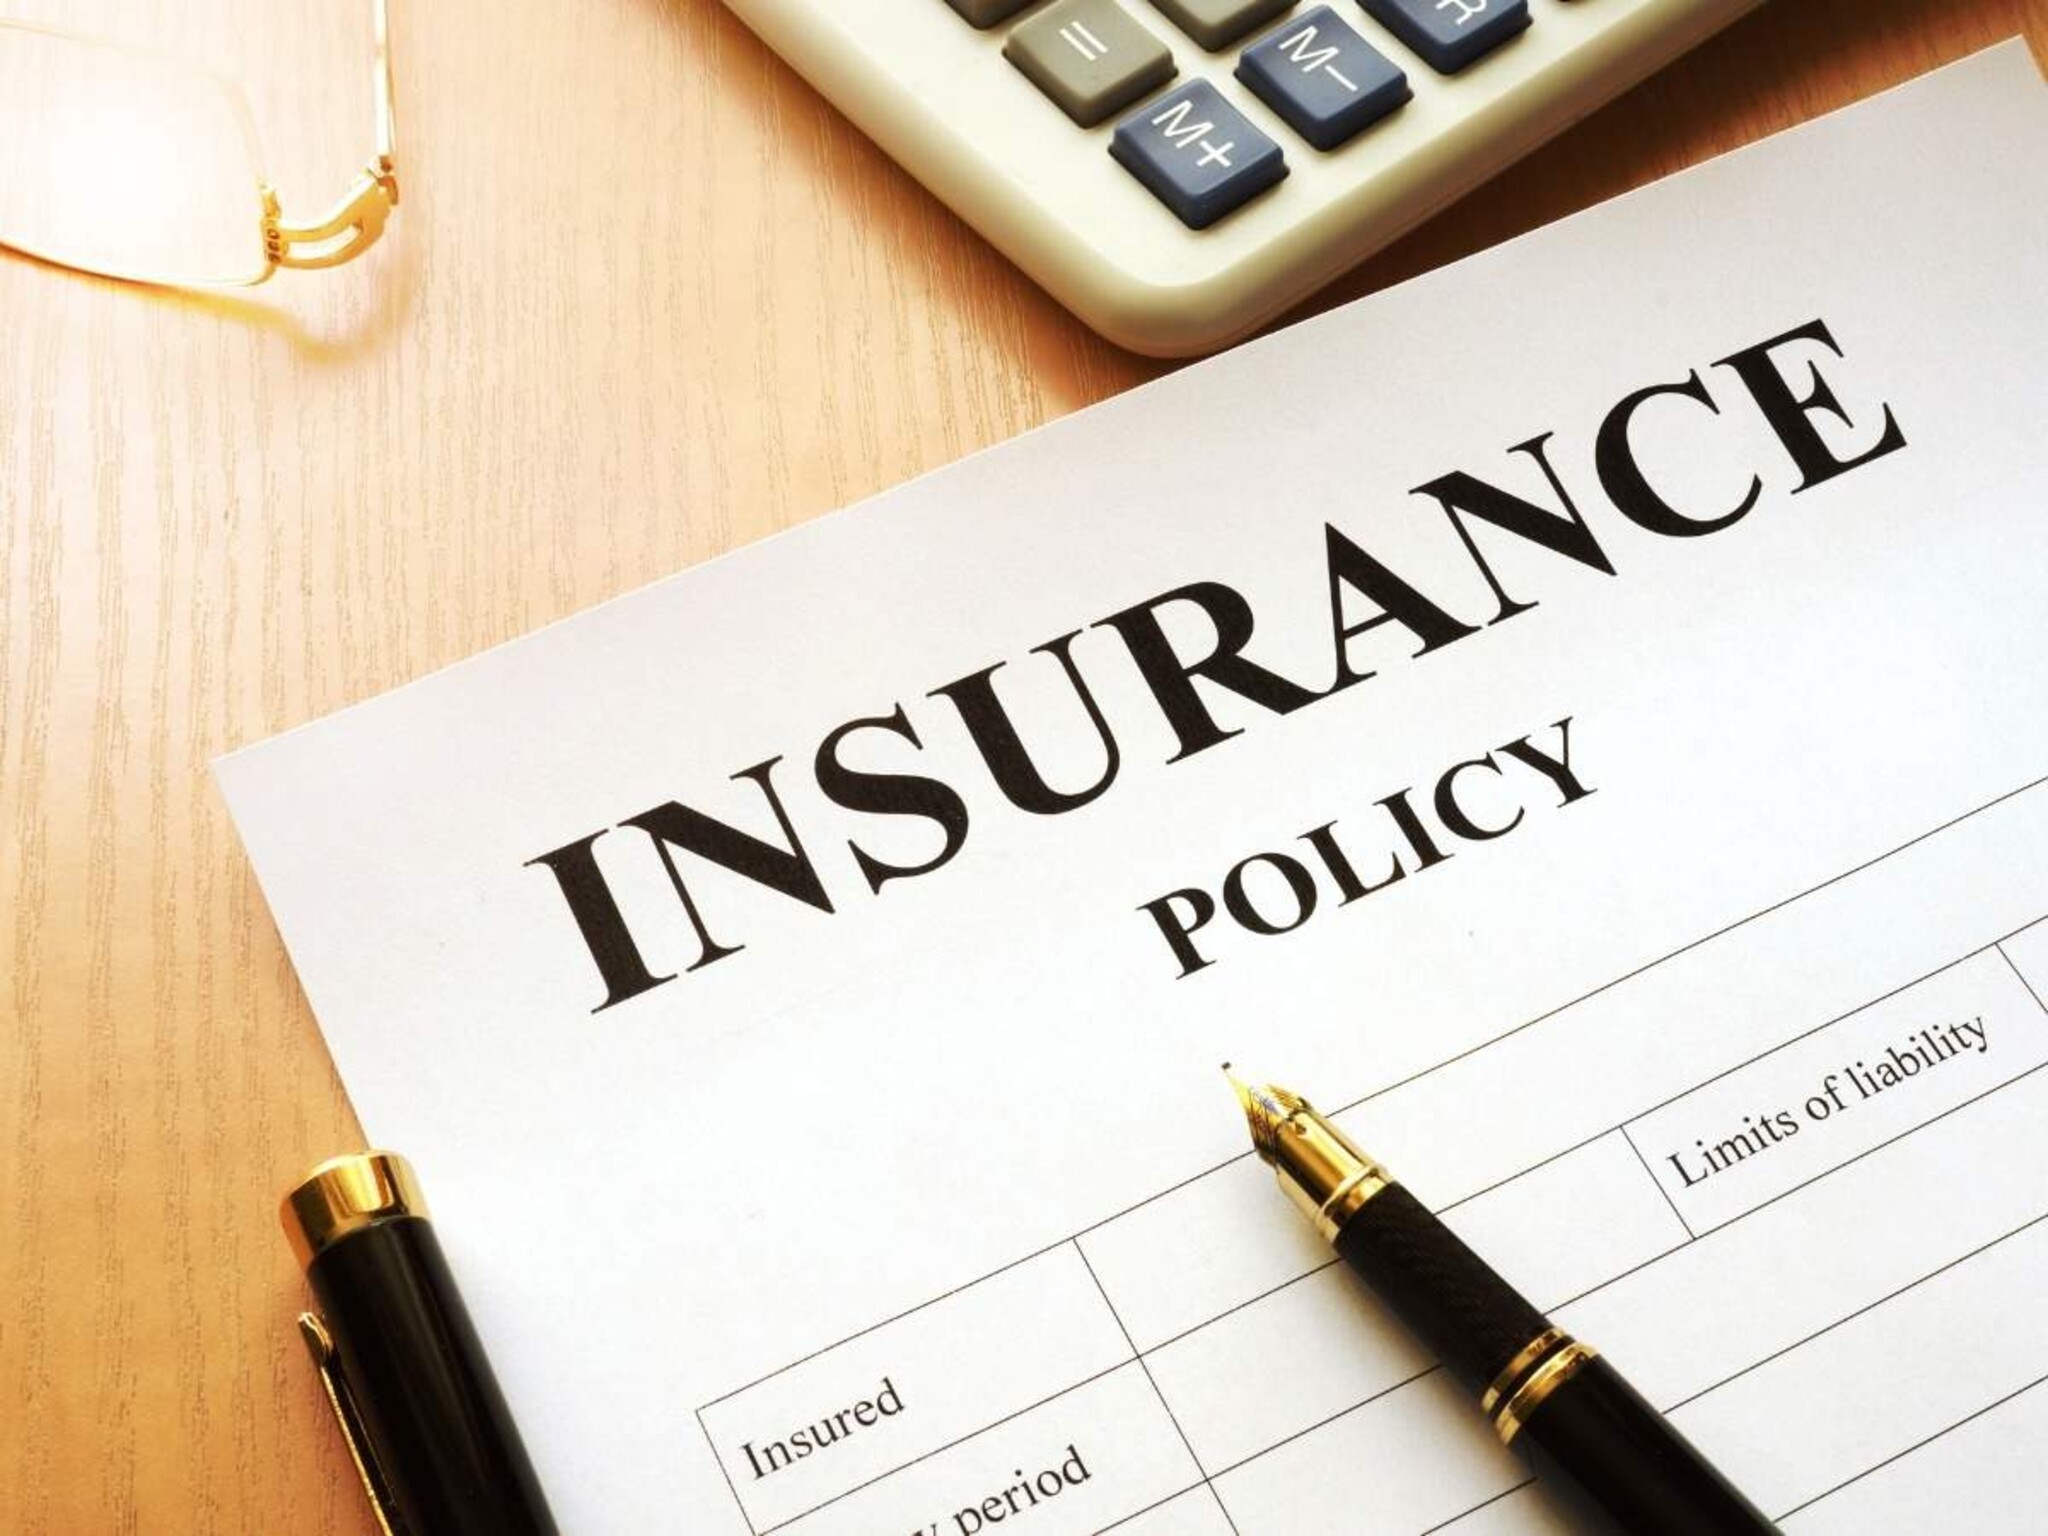 The UAE announced an increase in health insurance premiums after implementing the new system